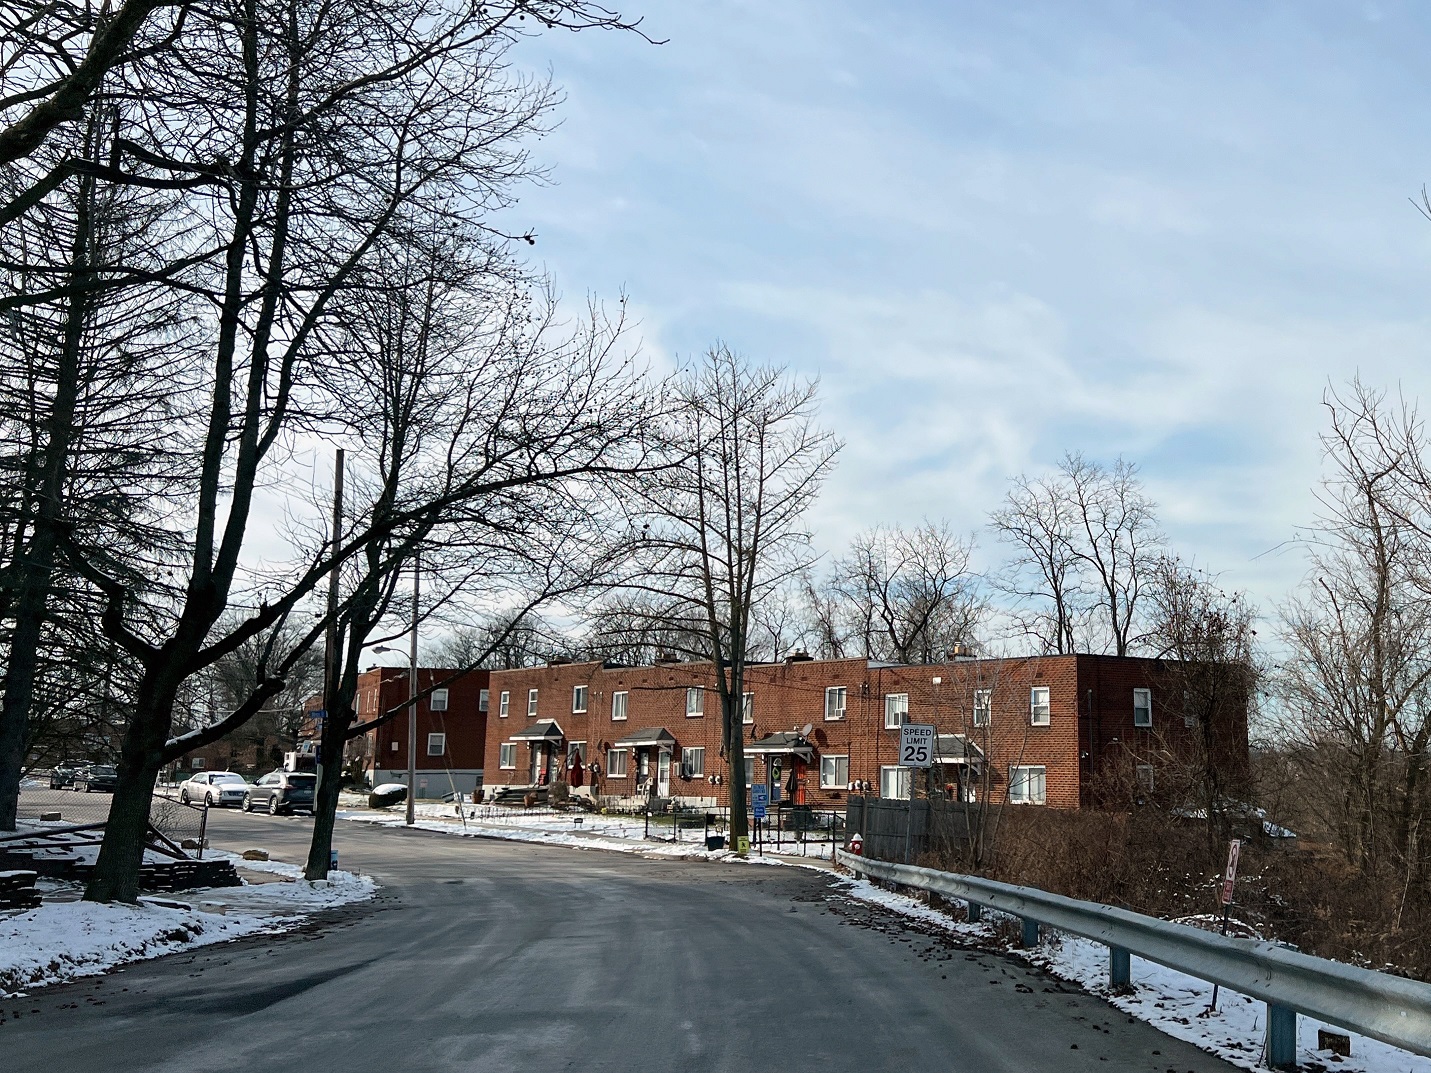 Row of connected two-story square buildings next to road in winter.